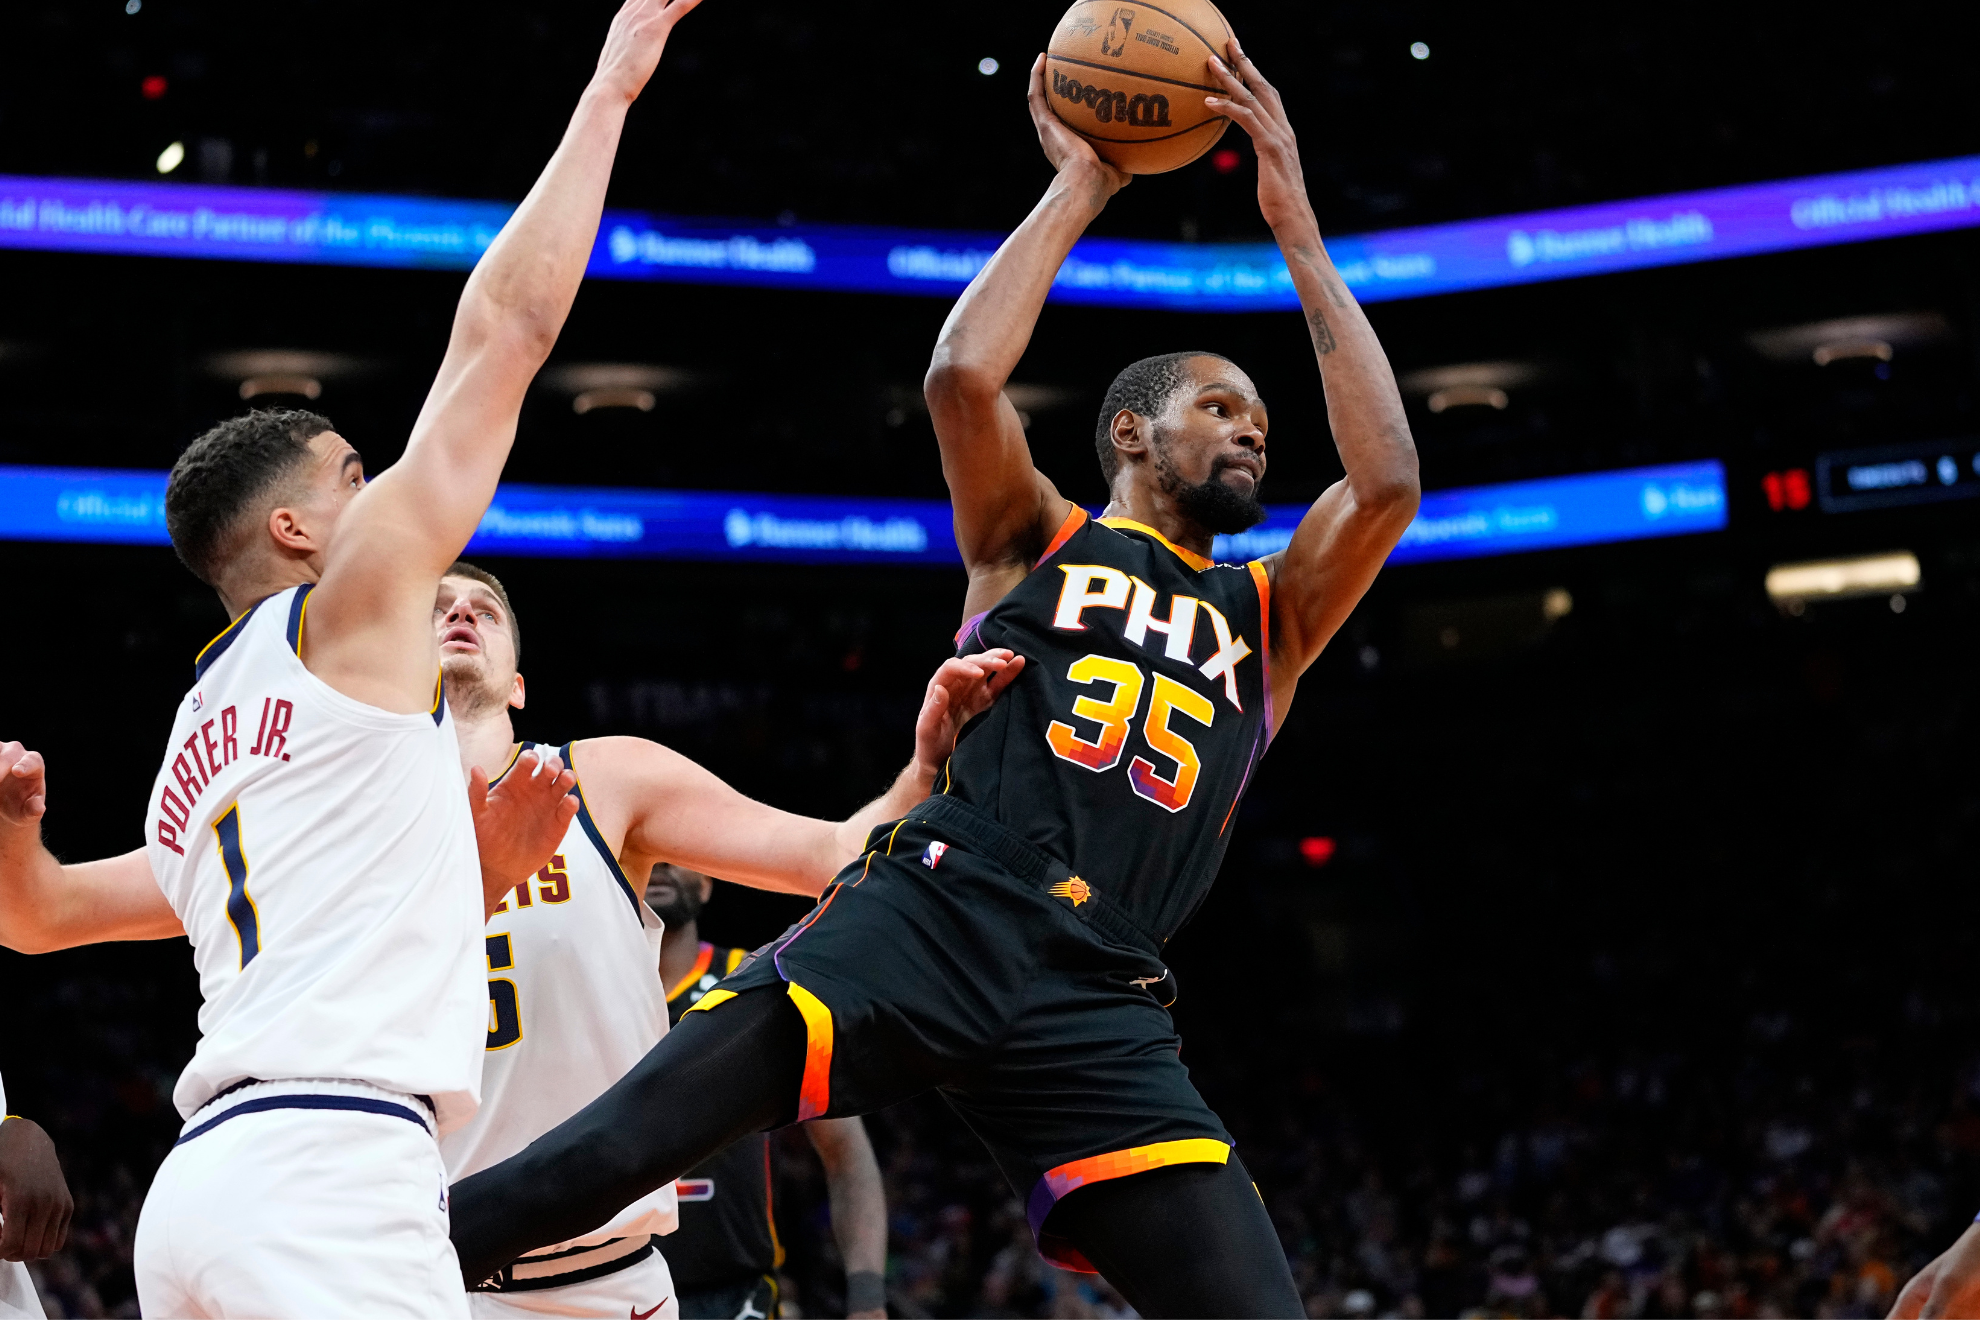 Kevin Durant scored 36 points as the Suns protected home court.